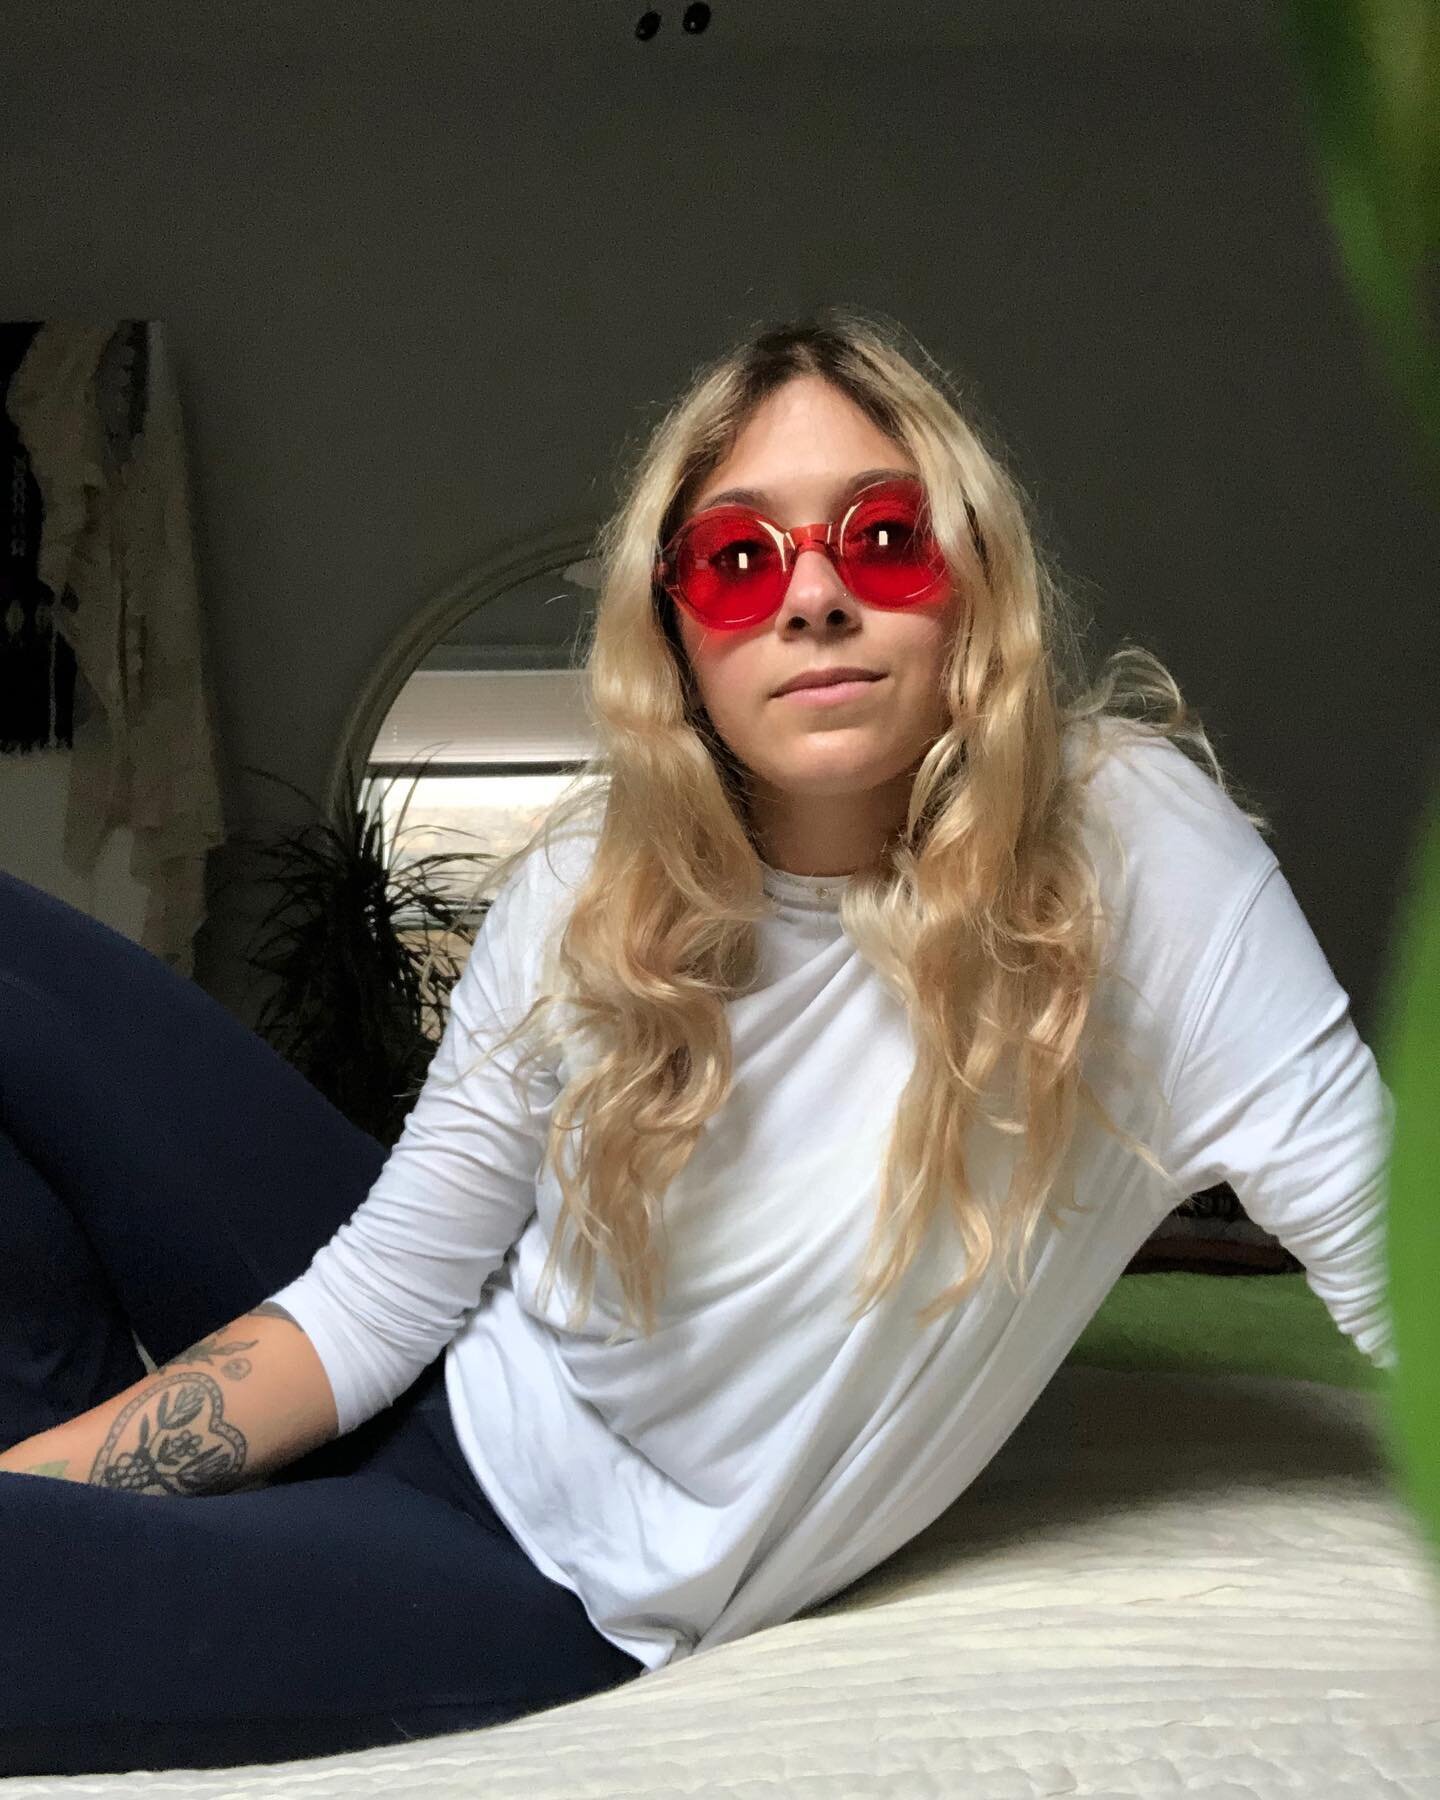 Ruby on ruby on ruby is a look we can always get behind!! &hearts;️❤️&hearts;️

Chicago-based floral designer @paradis_bb rocking her Love Train frames and looking like a 70s dream queen ✨ 

Click on that ❣️link in bio❣️ to snag yourself a pair of yo